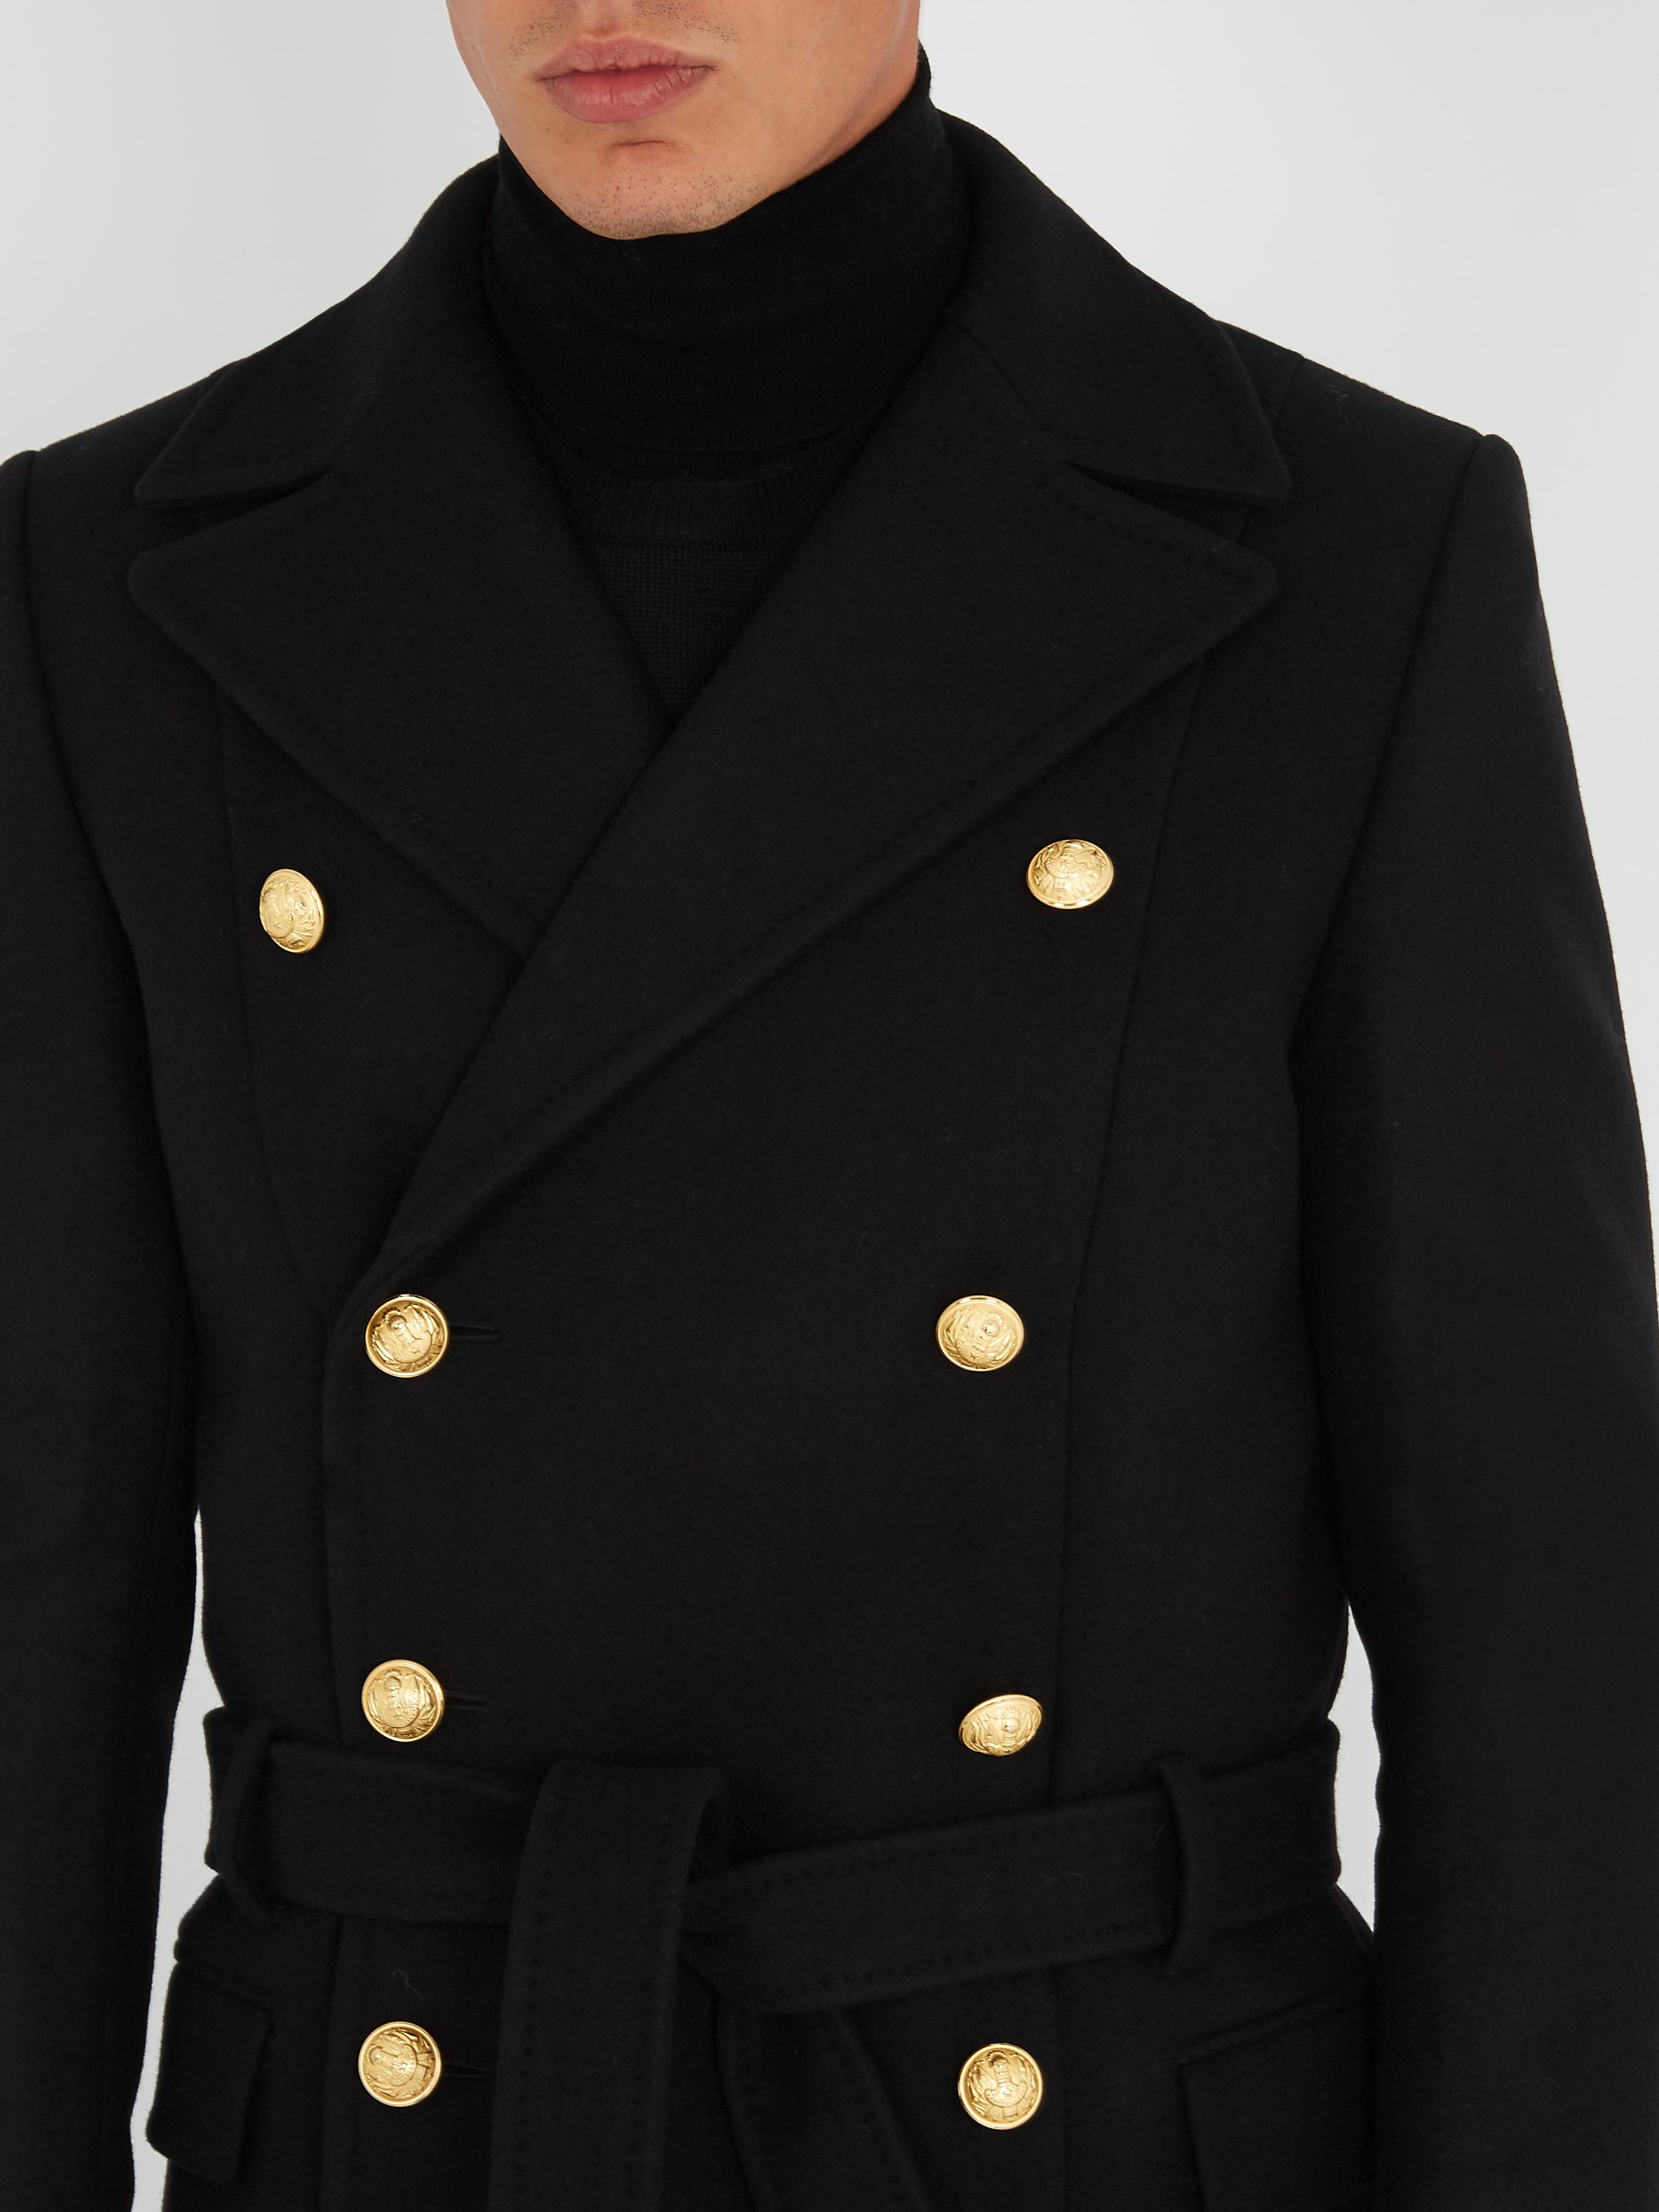 Balmain Double-breasted Military Coat in Black for Men | Lyst